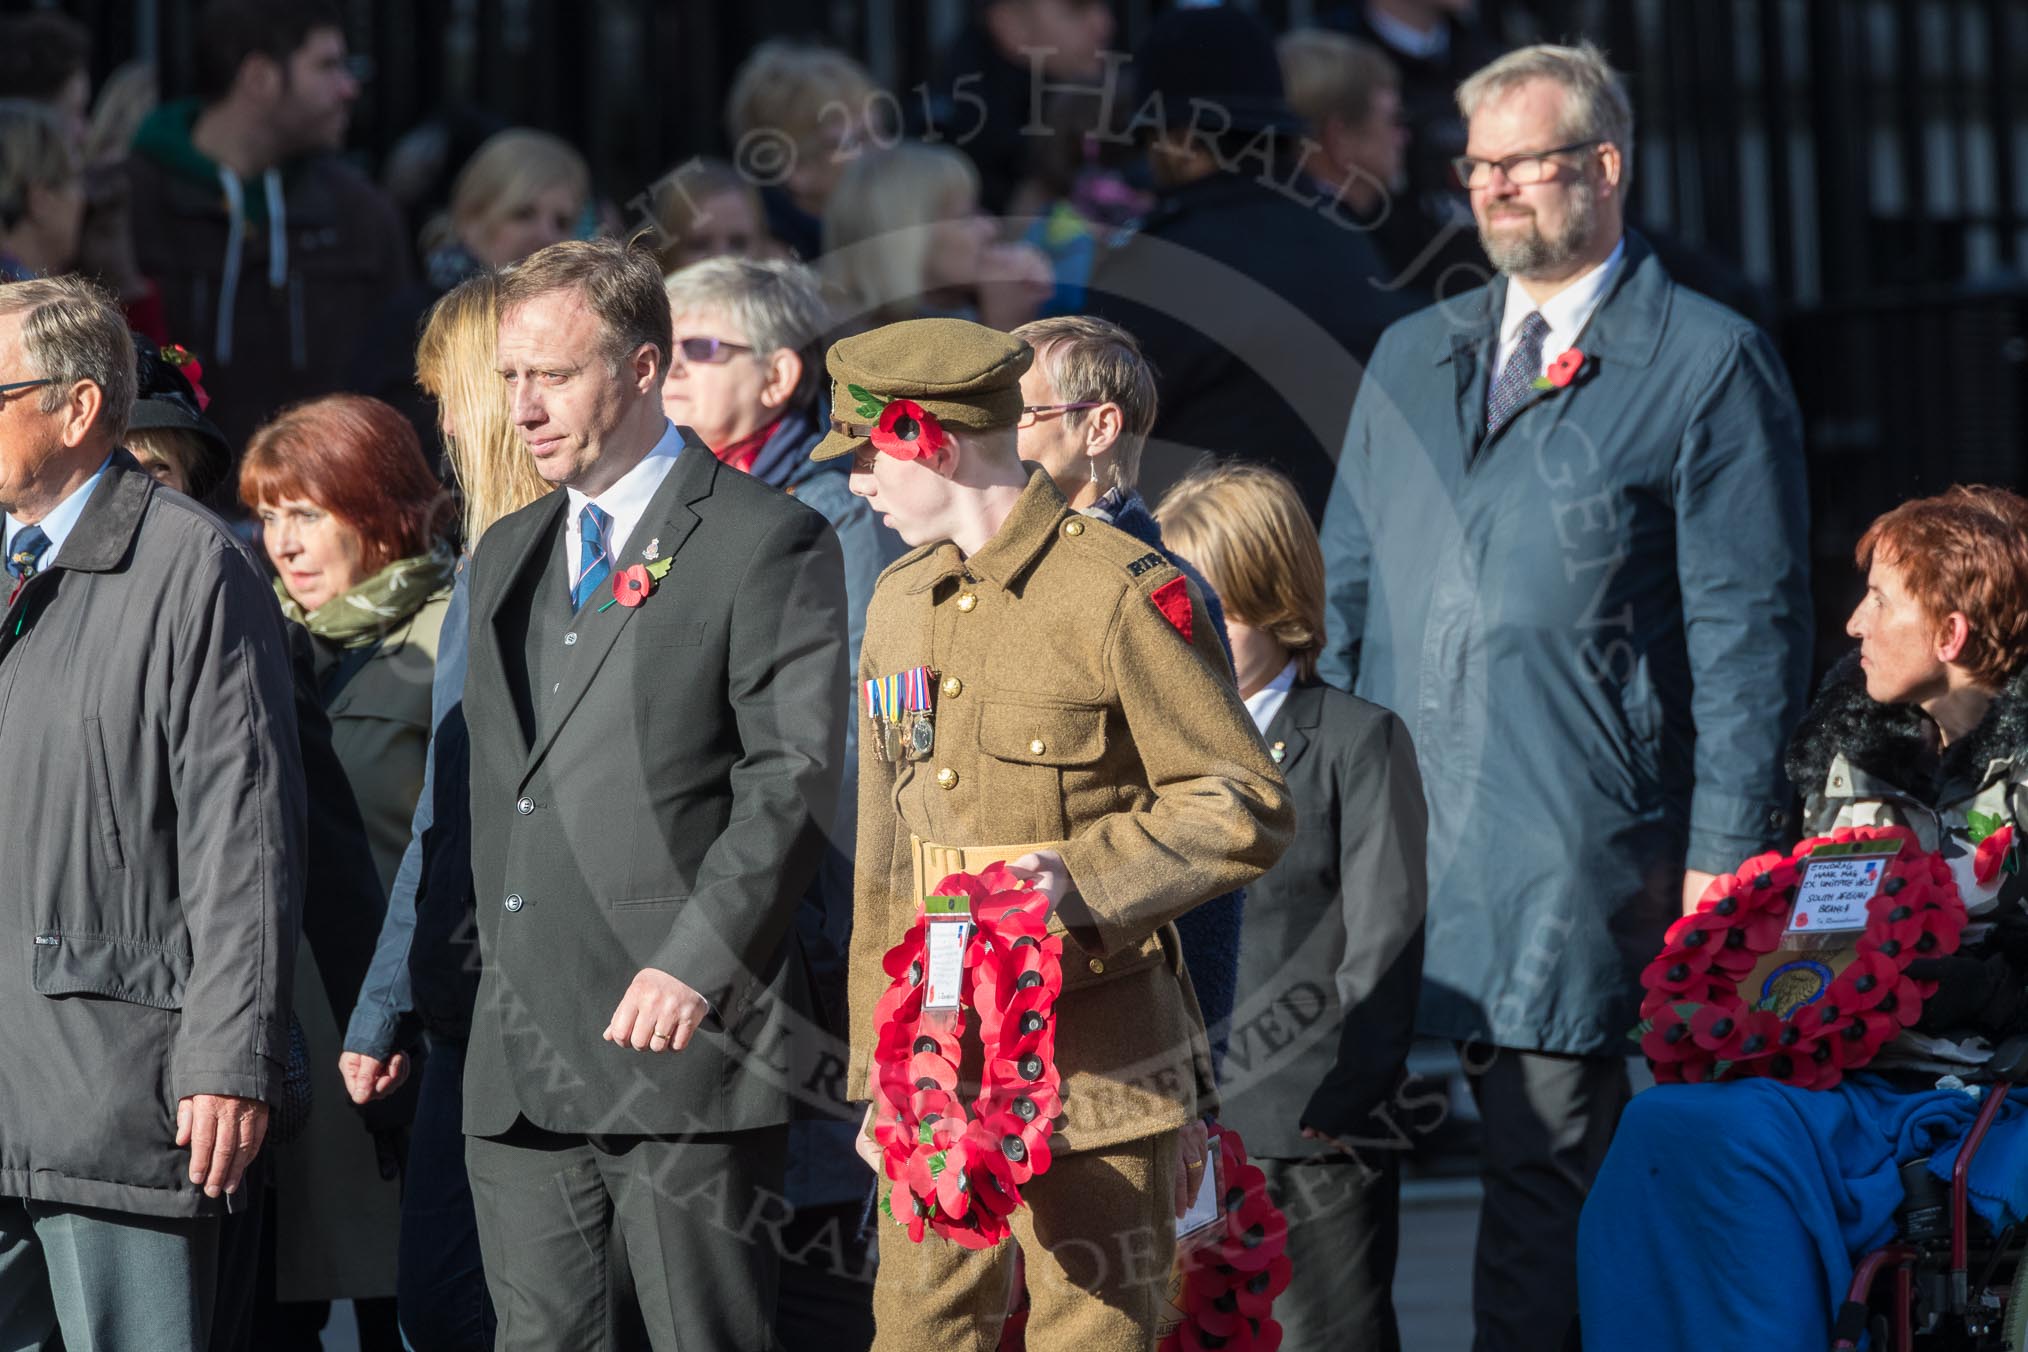 March Past, Remembrance Sunday at the Cenotaph 2016: M22 The Royal British Legion - Civilians.
Cenotaph, Whitehall, London SW1,
London,
Greater London,
United Kingdom,
on 13 November 2016 at 13:16, image #2671